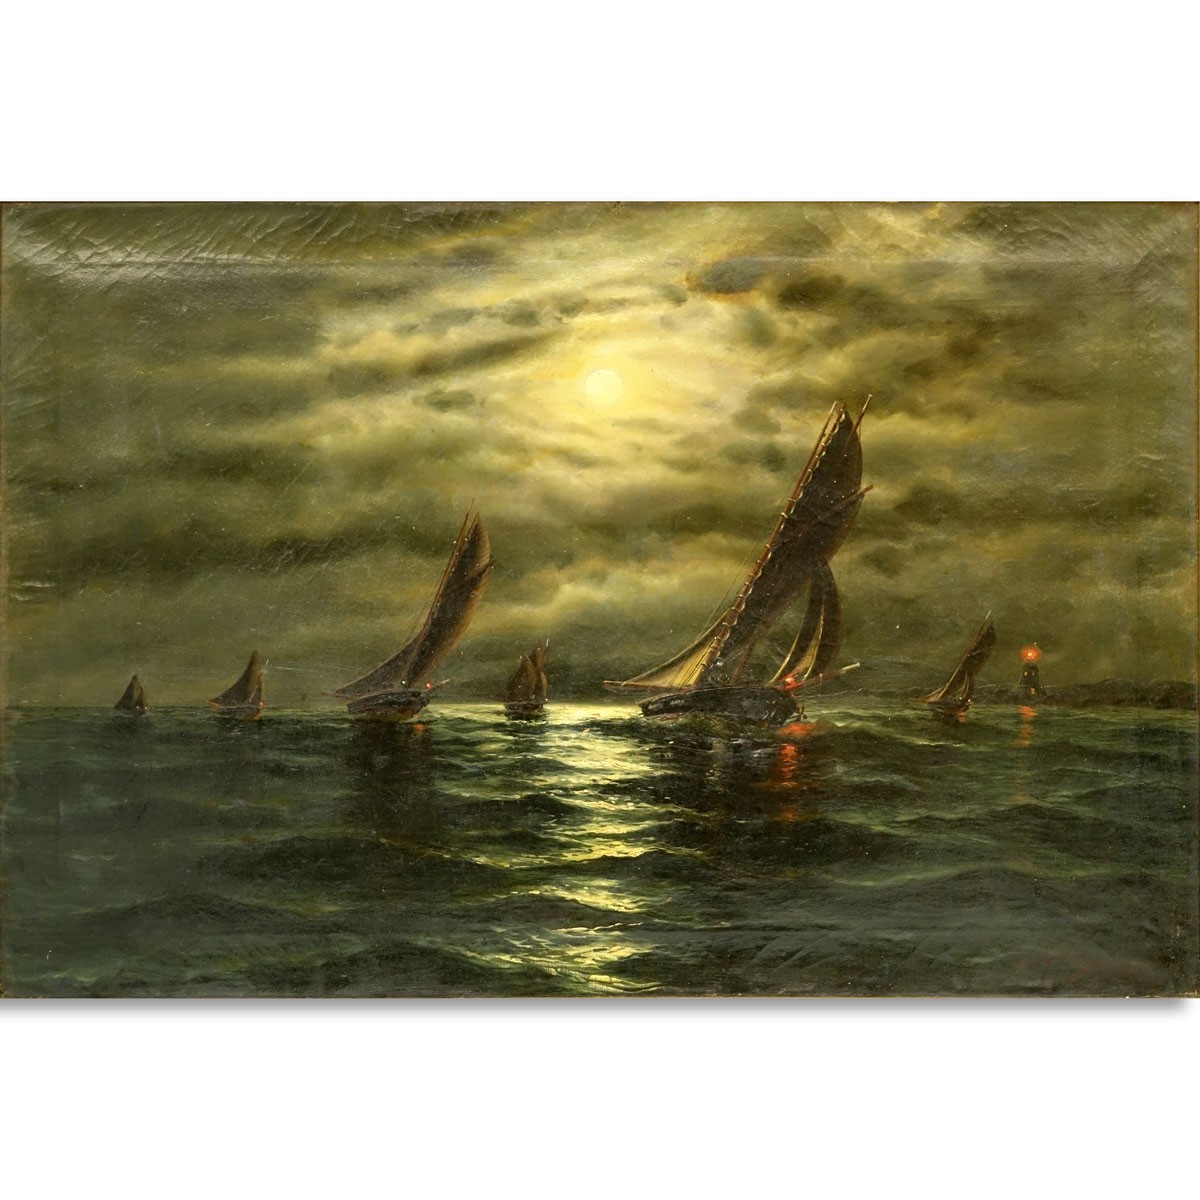 Richard De Ribcowsky, Bulgarian/American (1880 - 1936) Oil on canvas "Moonlight Sail". Signed lower right.